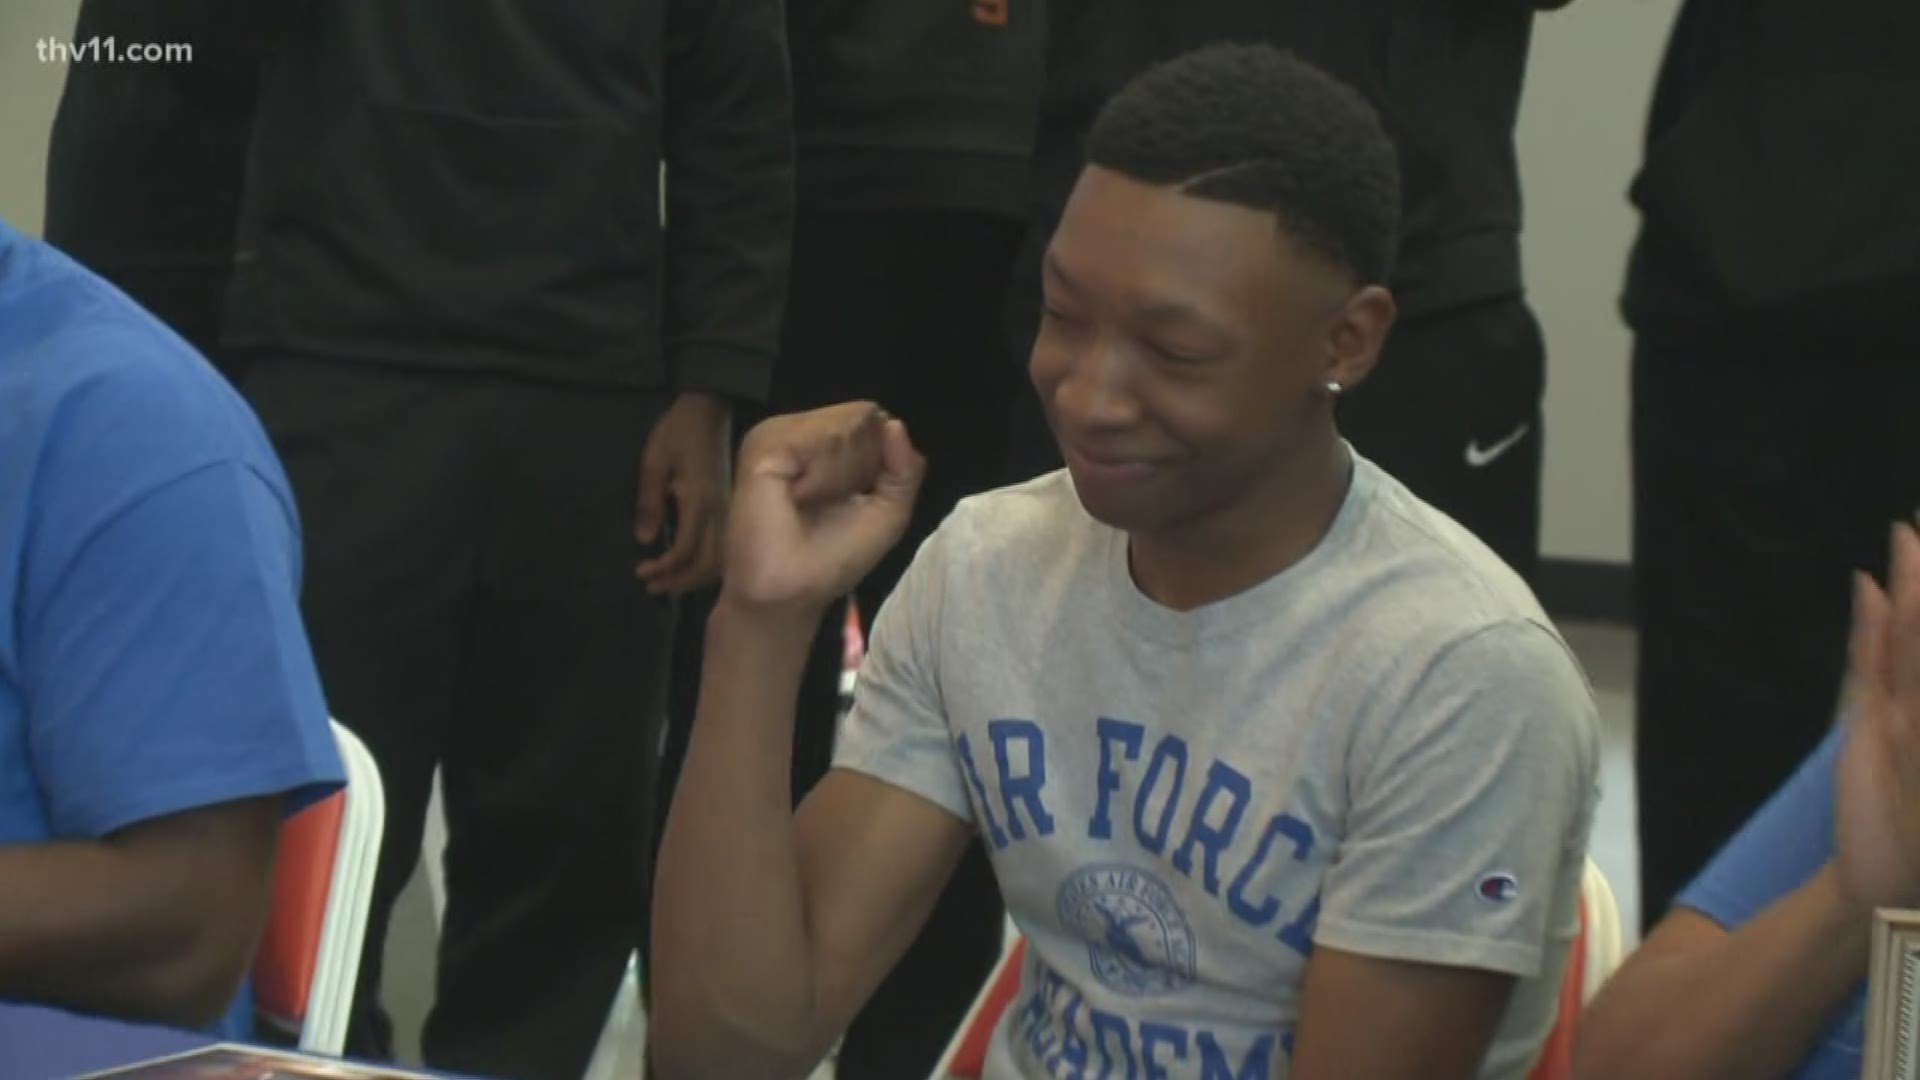 LR Hall's Carlos Miller Jr. signs with Air Force